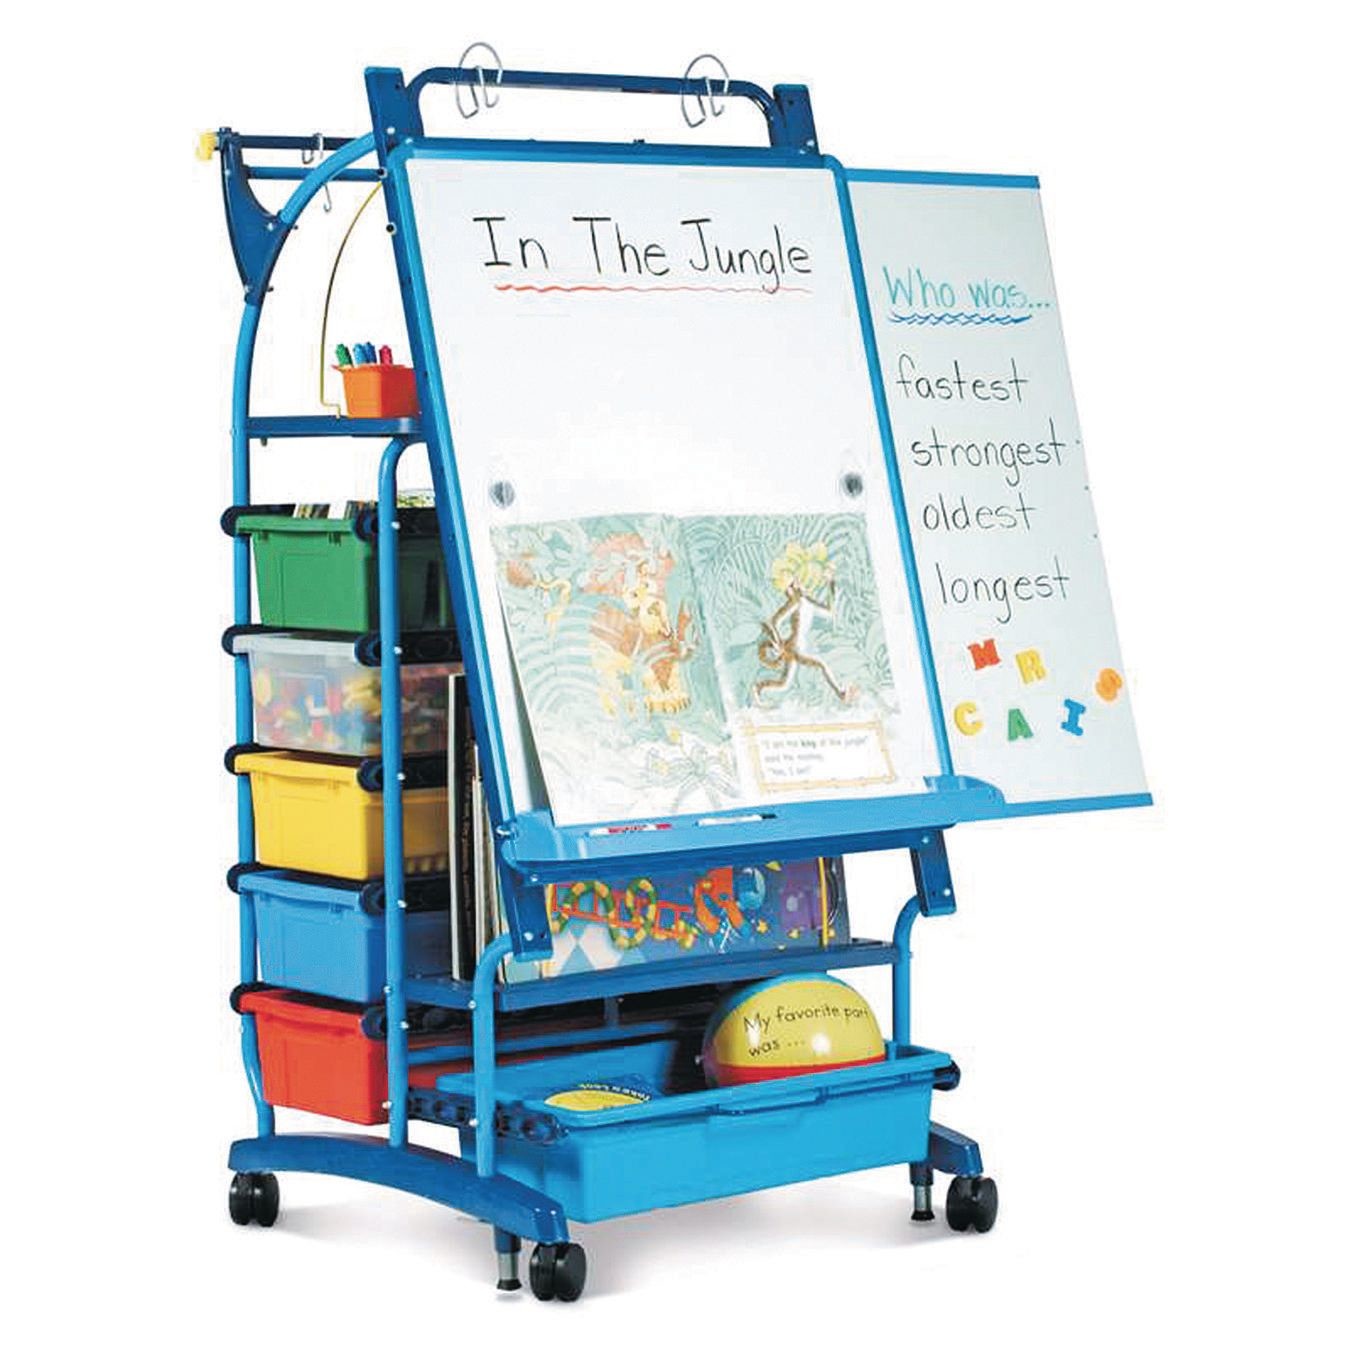 Copernicus Educational Products Marker Tray Magnetic Board Easel